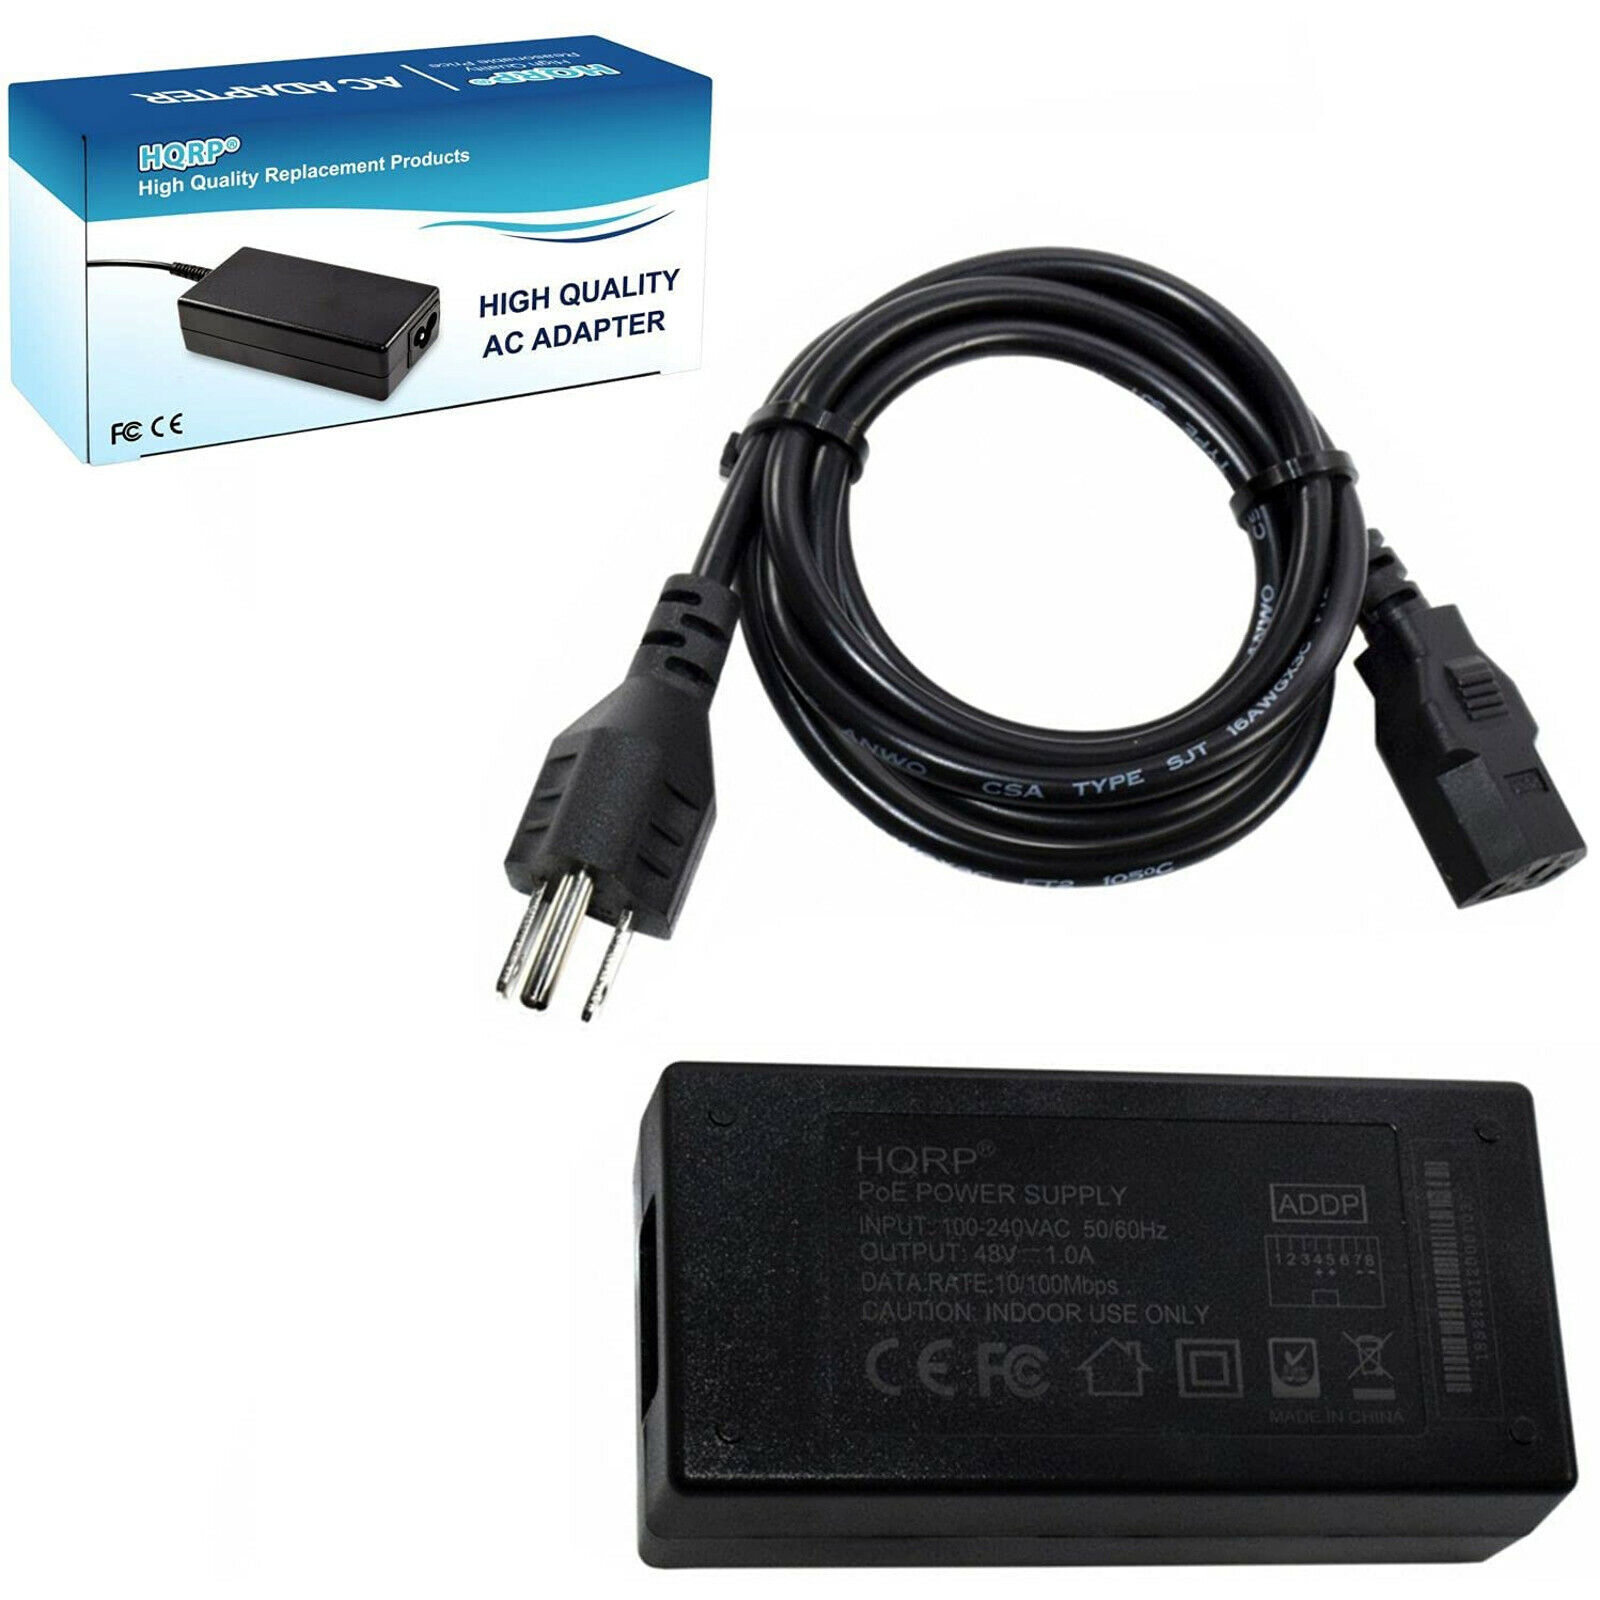 HQRP 48V POE Injector IEEE 802.3AT for Mitel 5330e, 5340, 5340e IP Phone